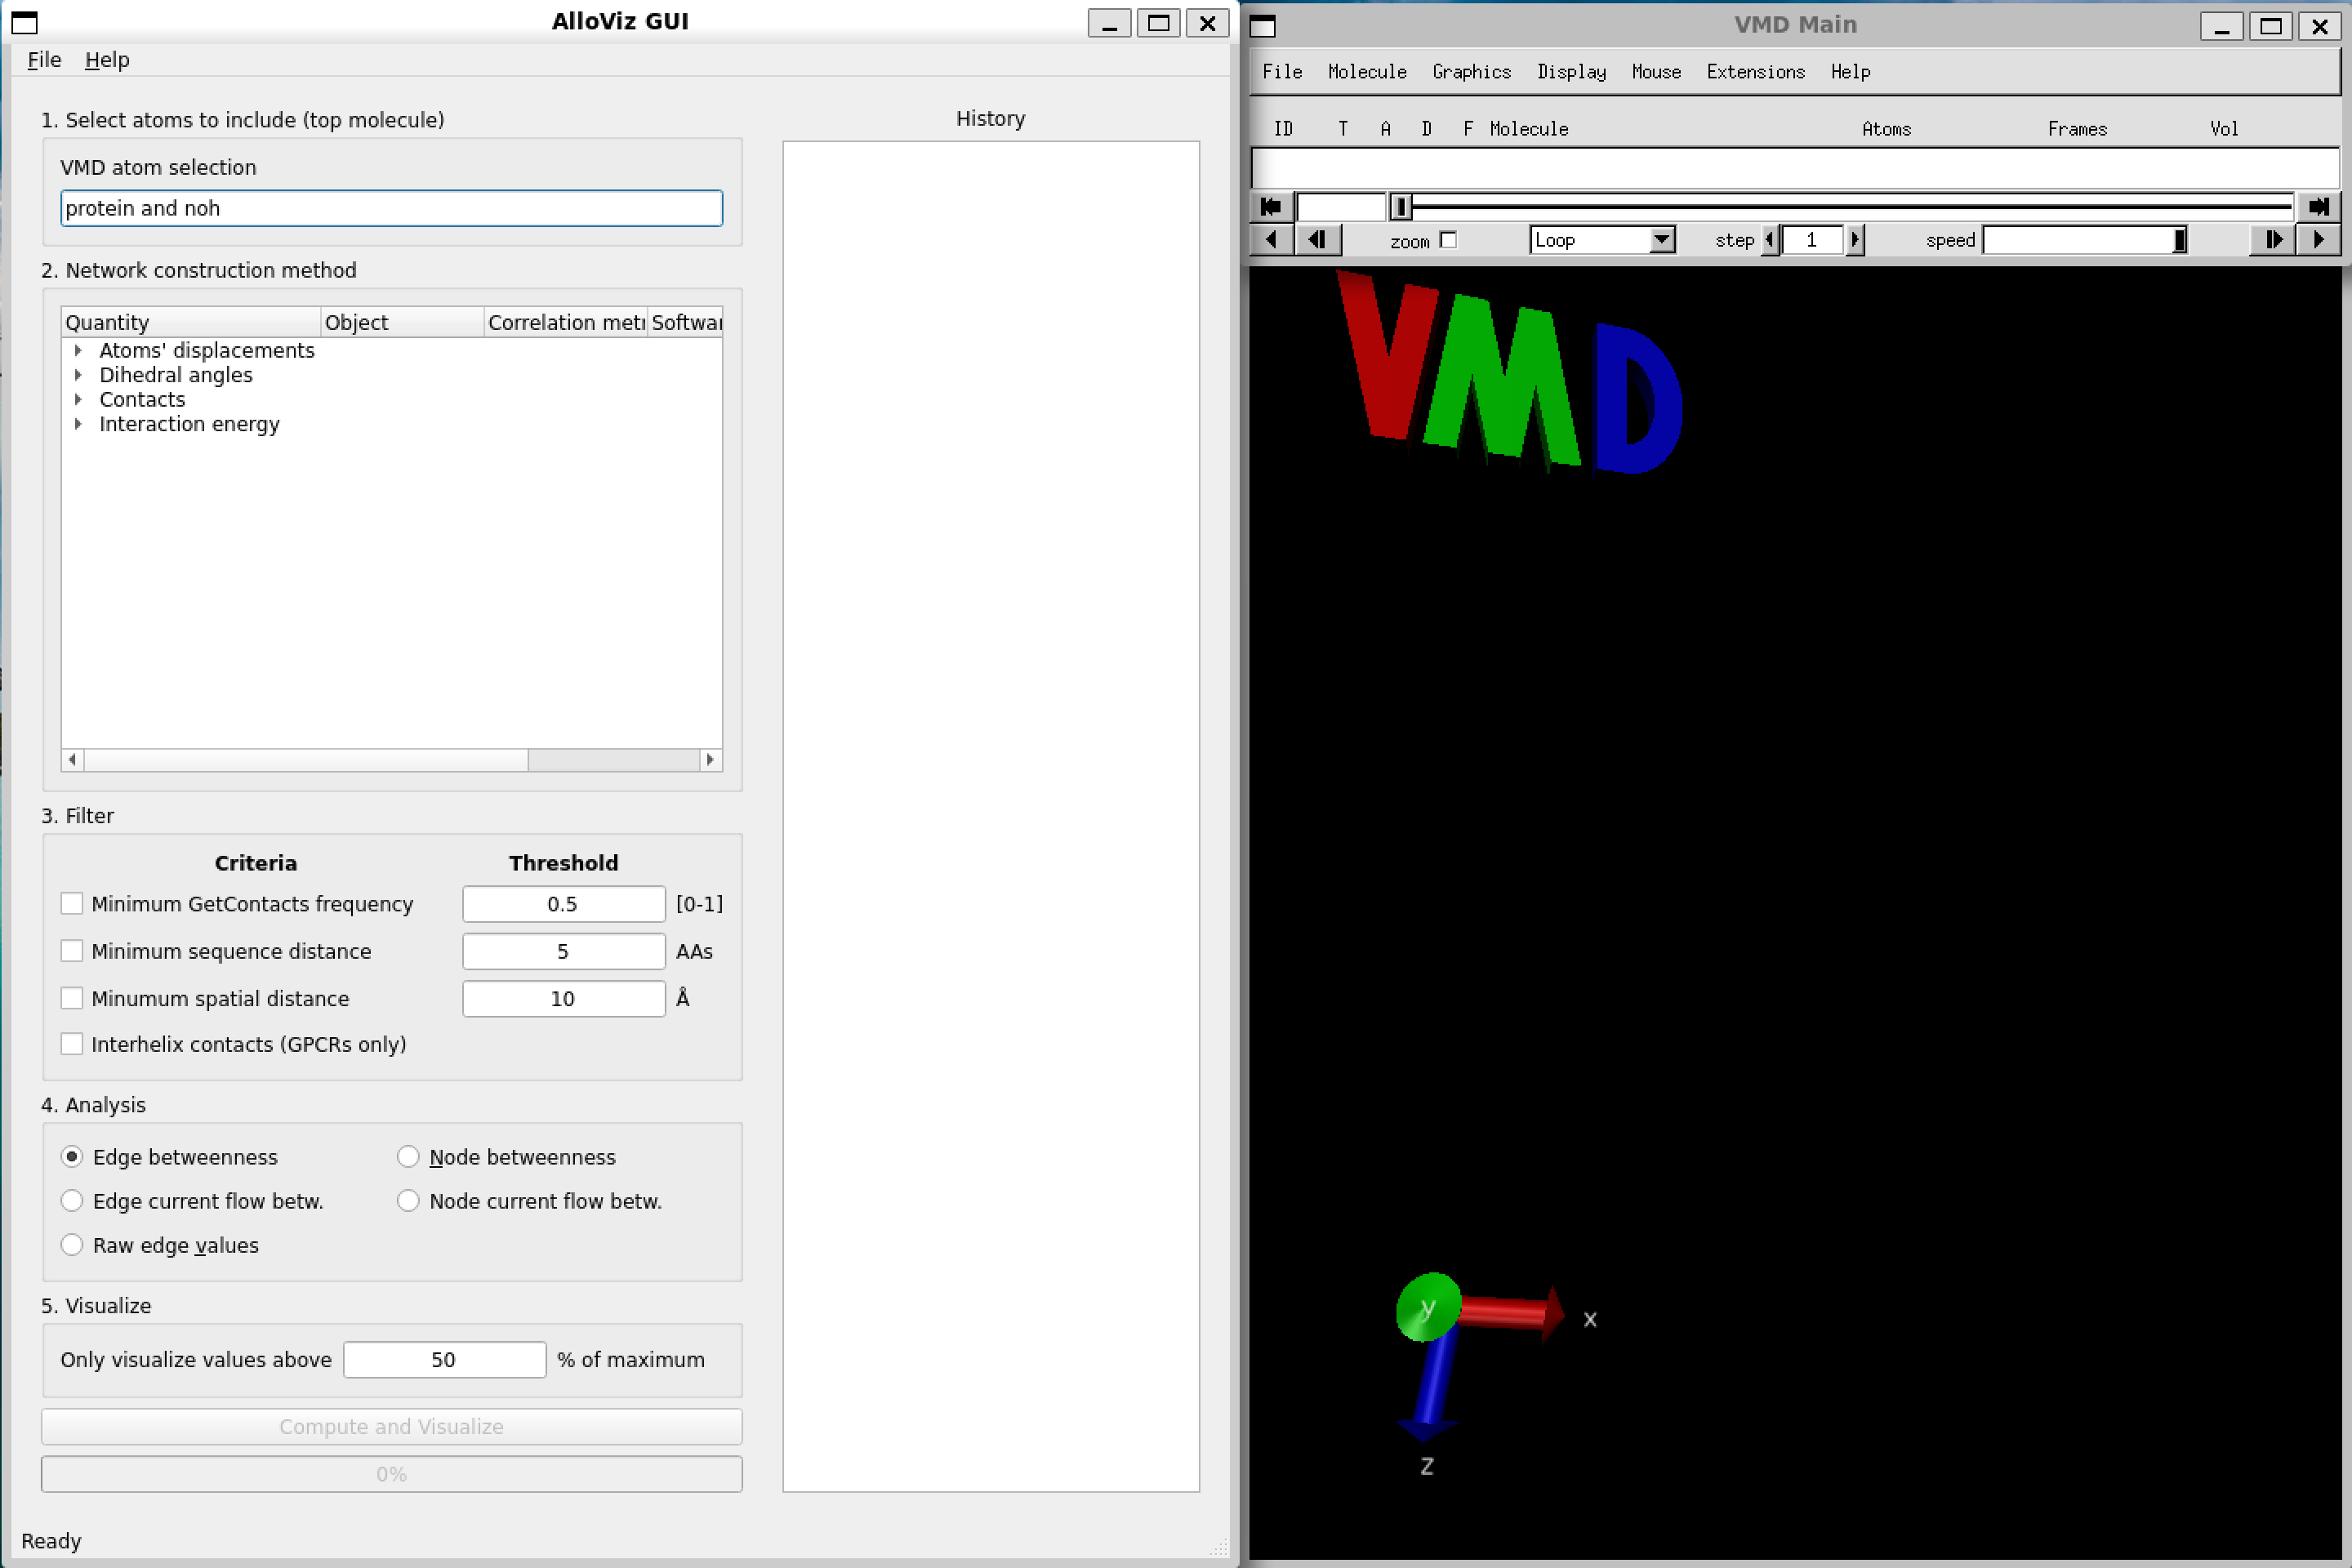 Screenshot of AlloViz GUI upon launching, showing the two canonical VMD windows on the right and a third window on the left half with the AlloViz GUI options for network calculation and analysis.